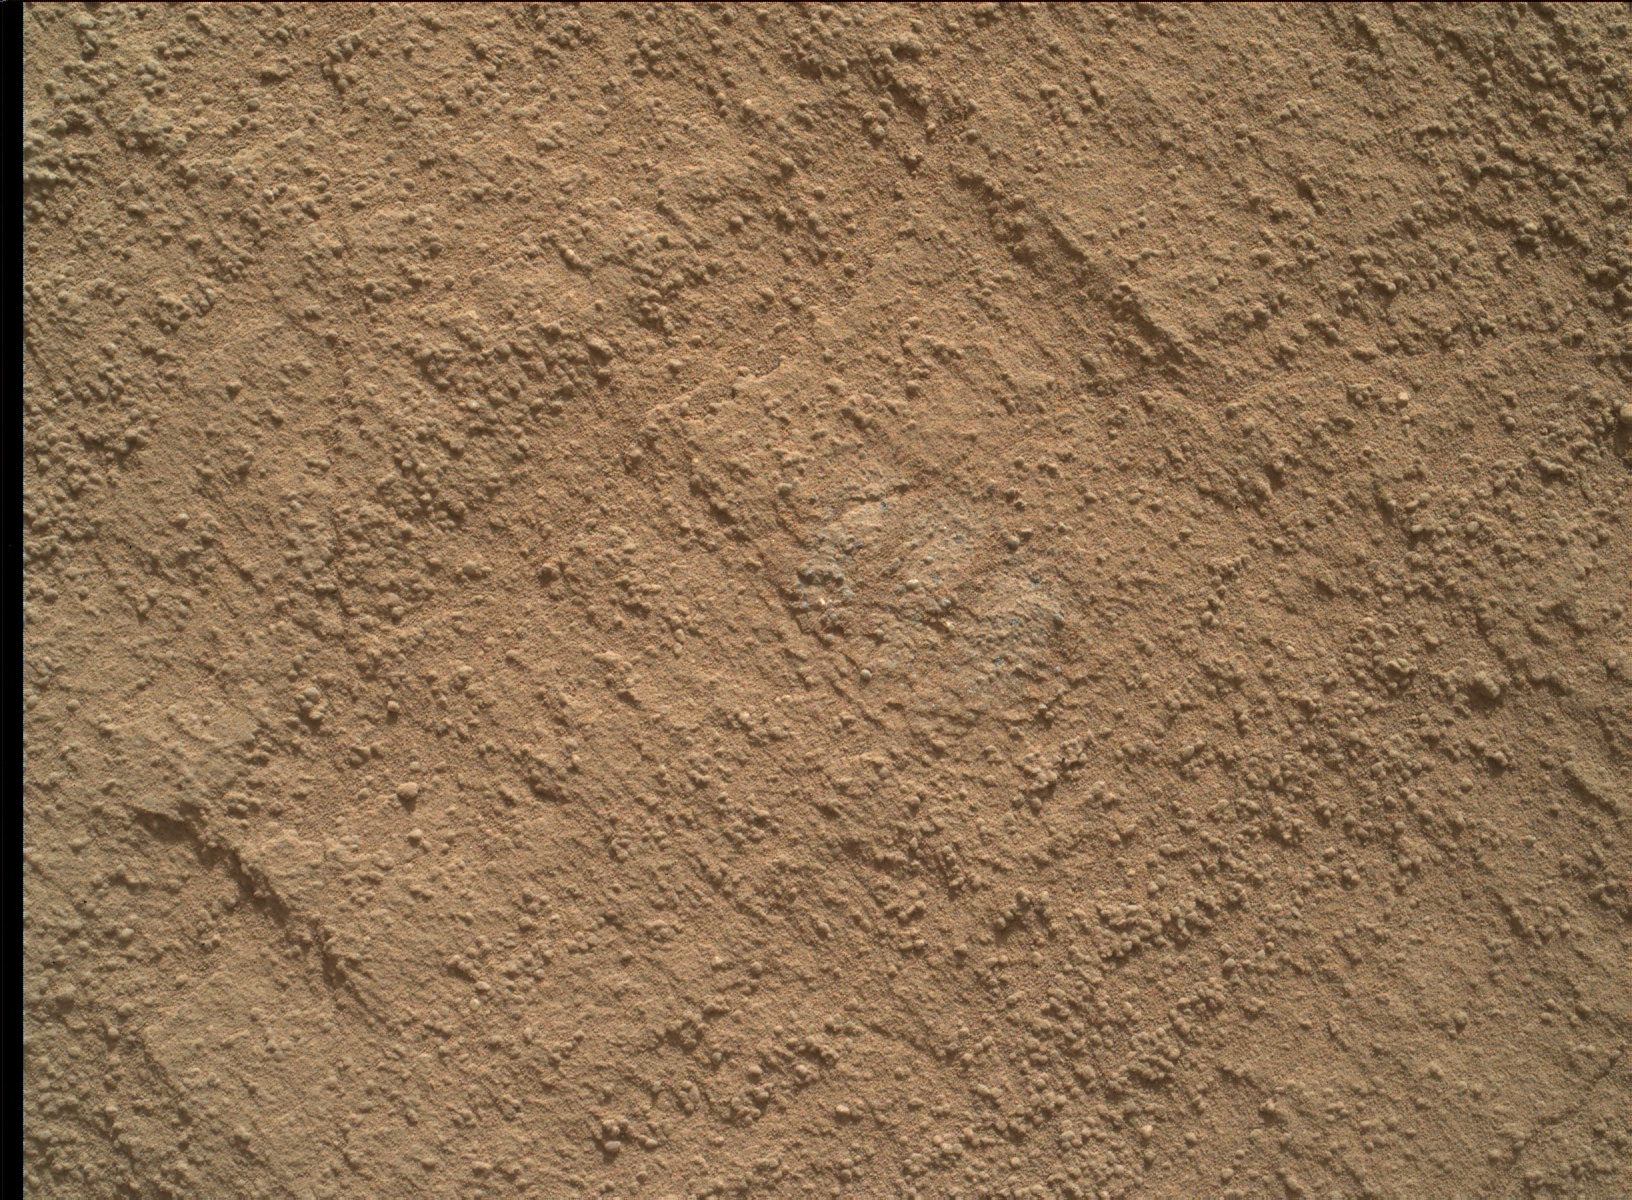 Nasa's Mars rover Curiosity acquired this image using its Mars Hand Lens Imager (MAHLI) on Sol 1330